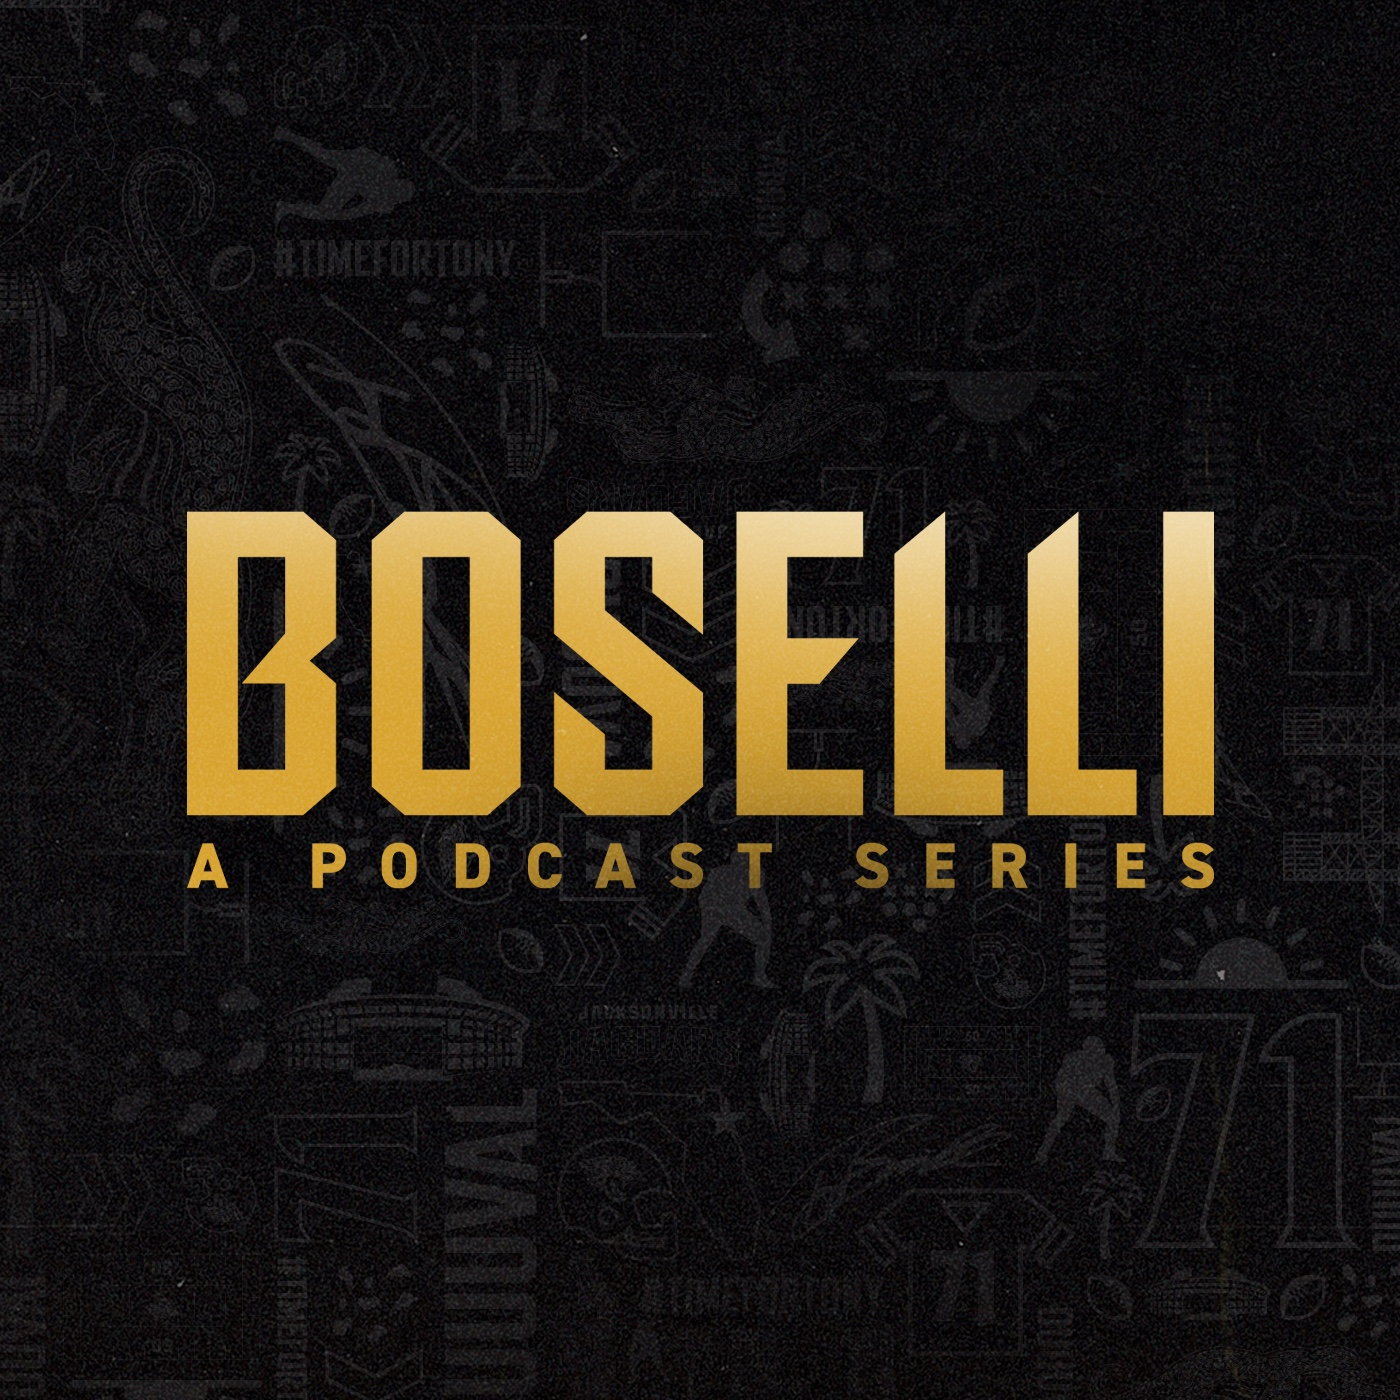 Ep. 2: Mark Brunell on what Tony’s induction means for the legacy of the early Jaguars | Boselli: A Podcast Series